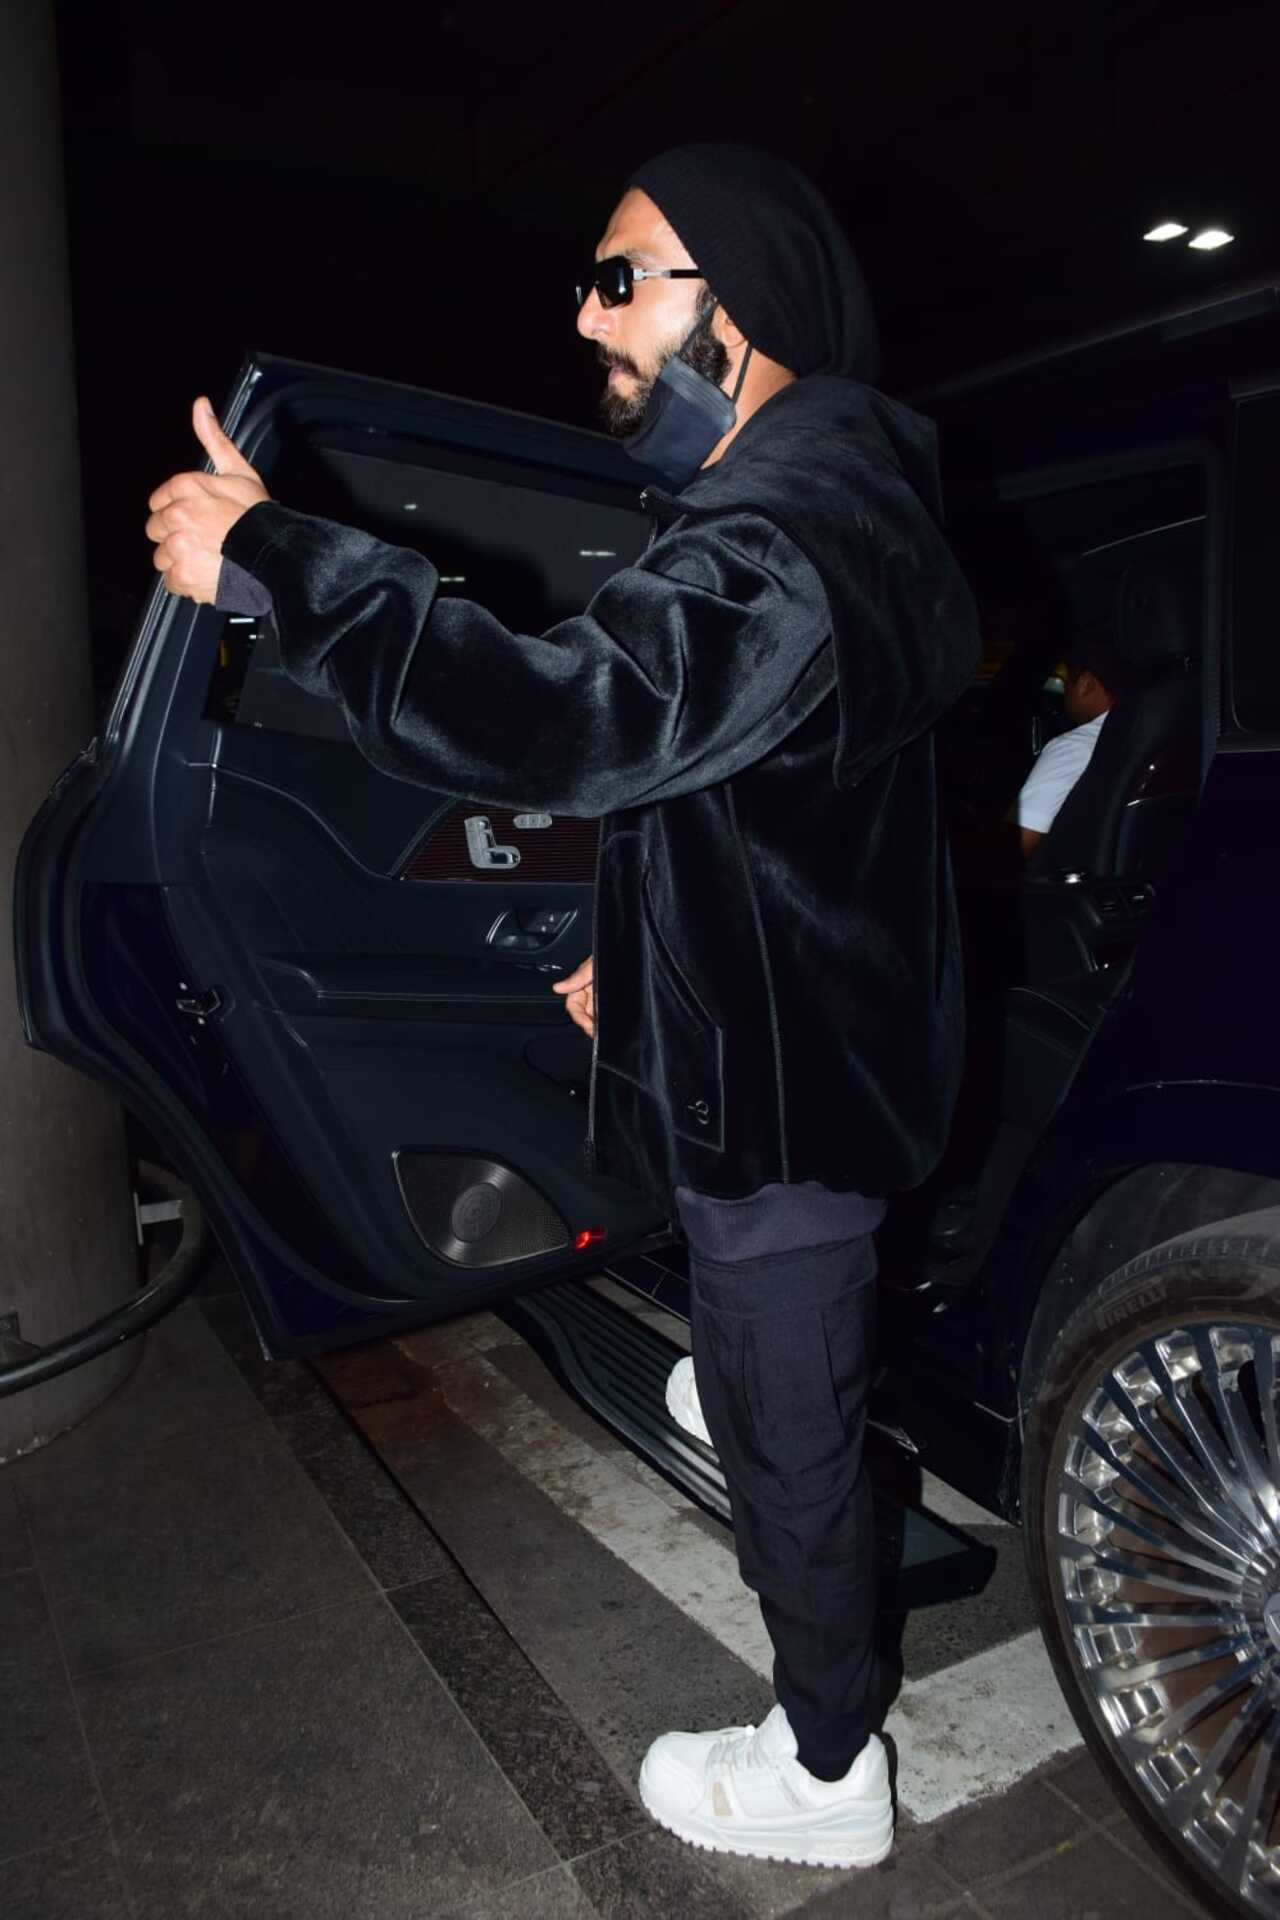 Ranveer Singh was also spotted in an all-black outfit at the Mumbai airport